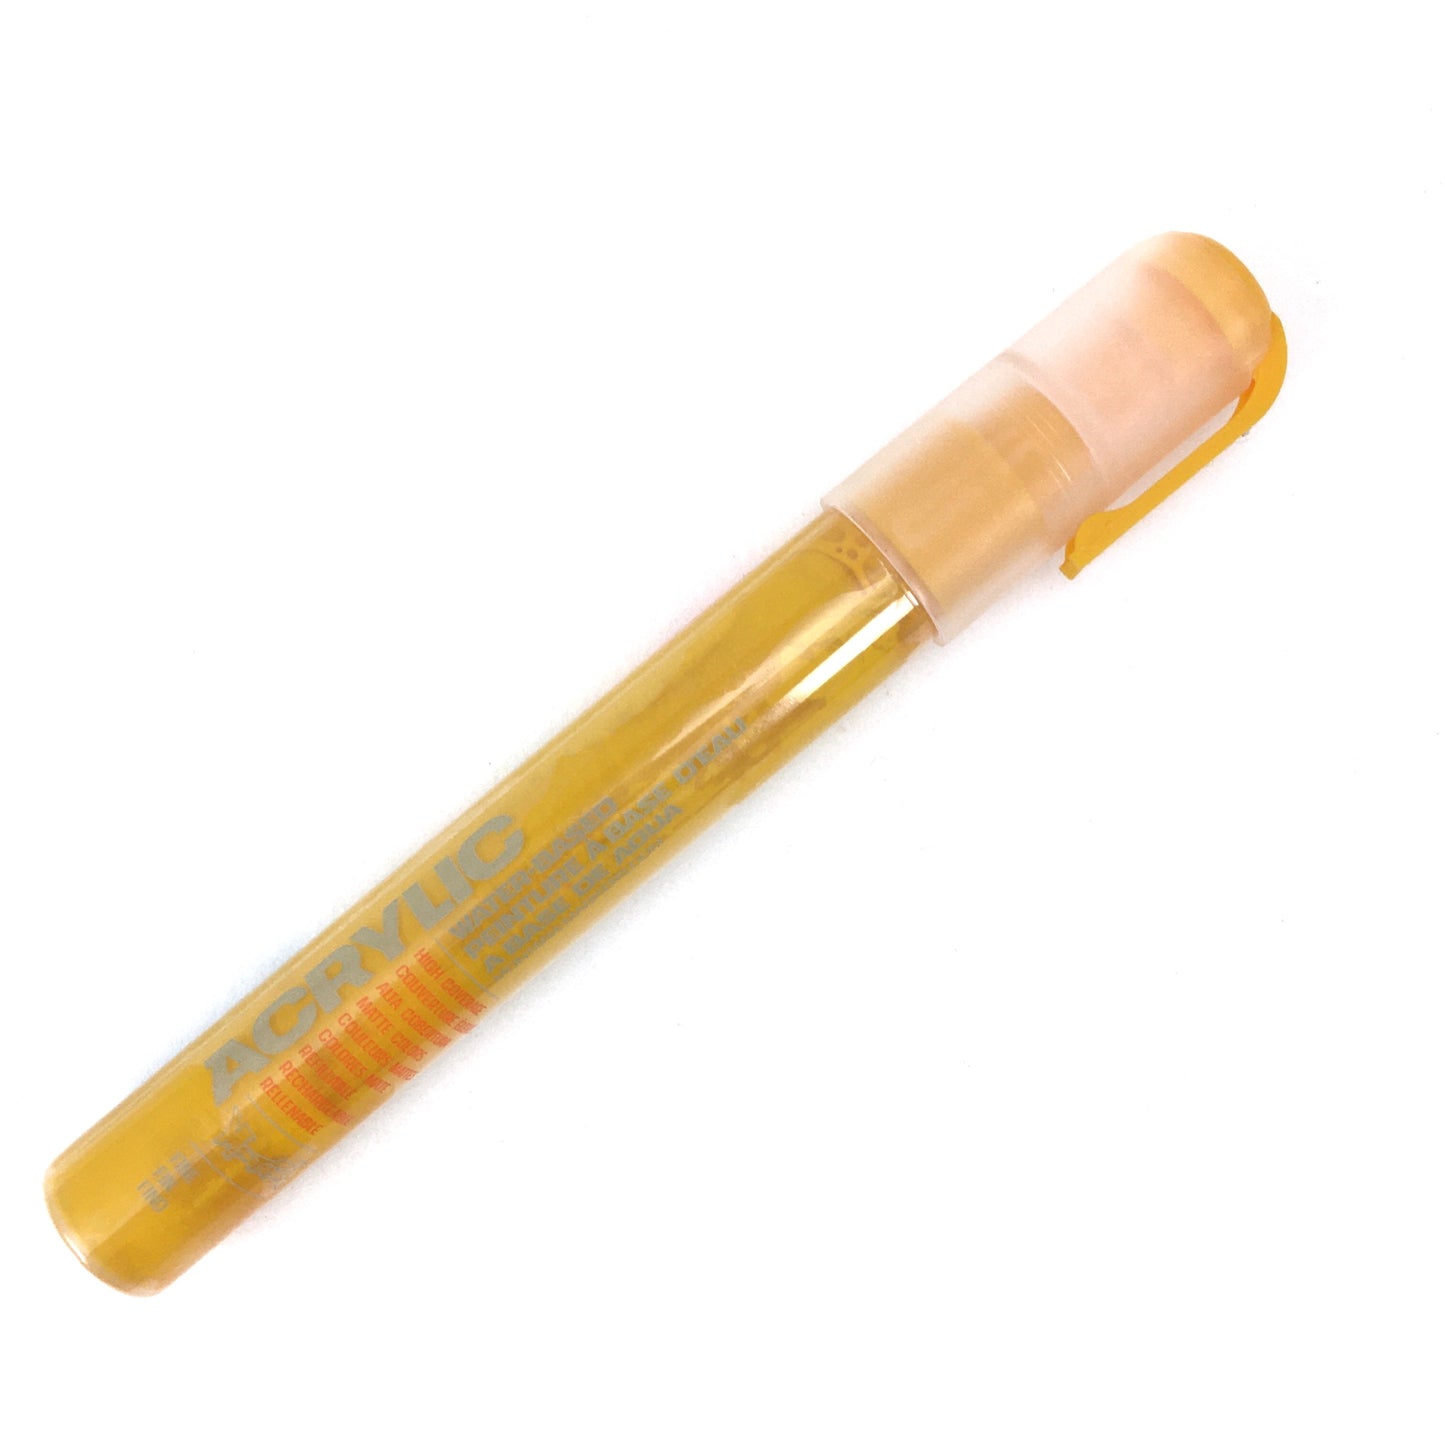 Montana Acrylic Paint Markers - Individuals - Shock Yellow / 2 mm by Montana - K. A. Artist Shop